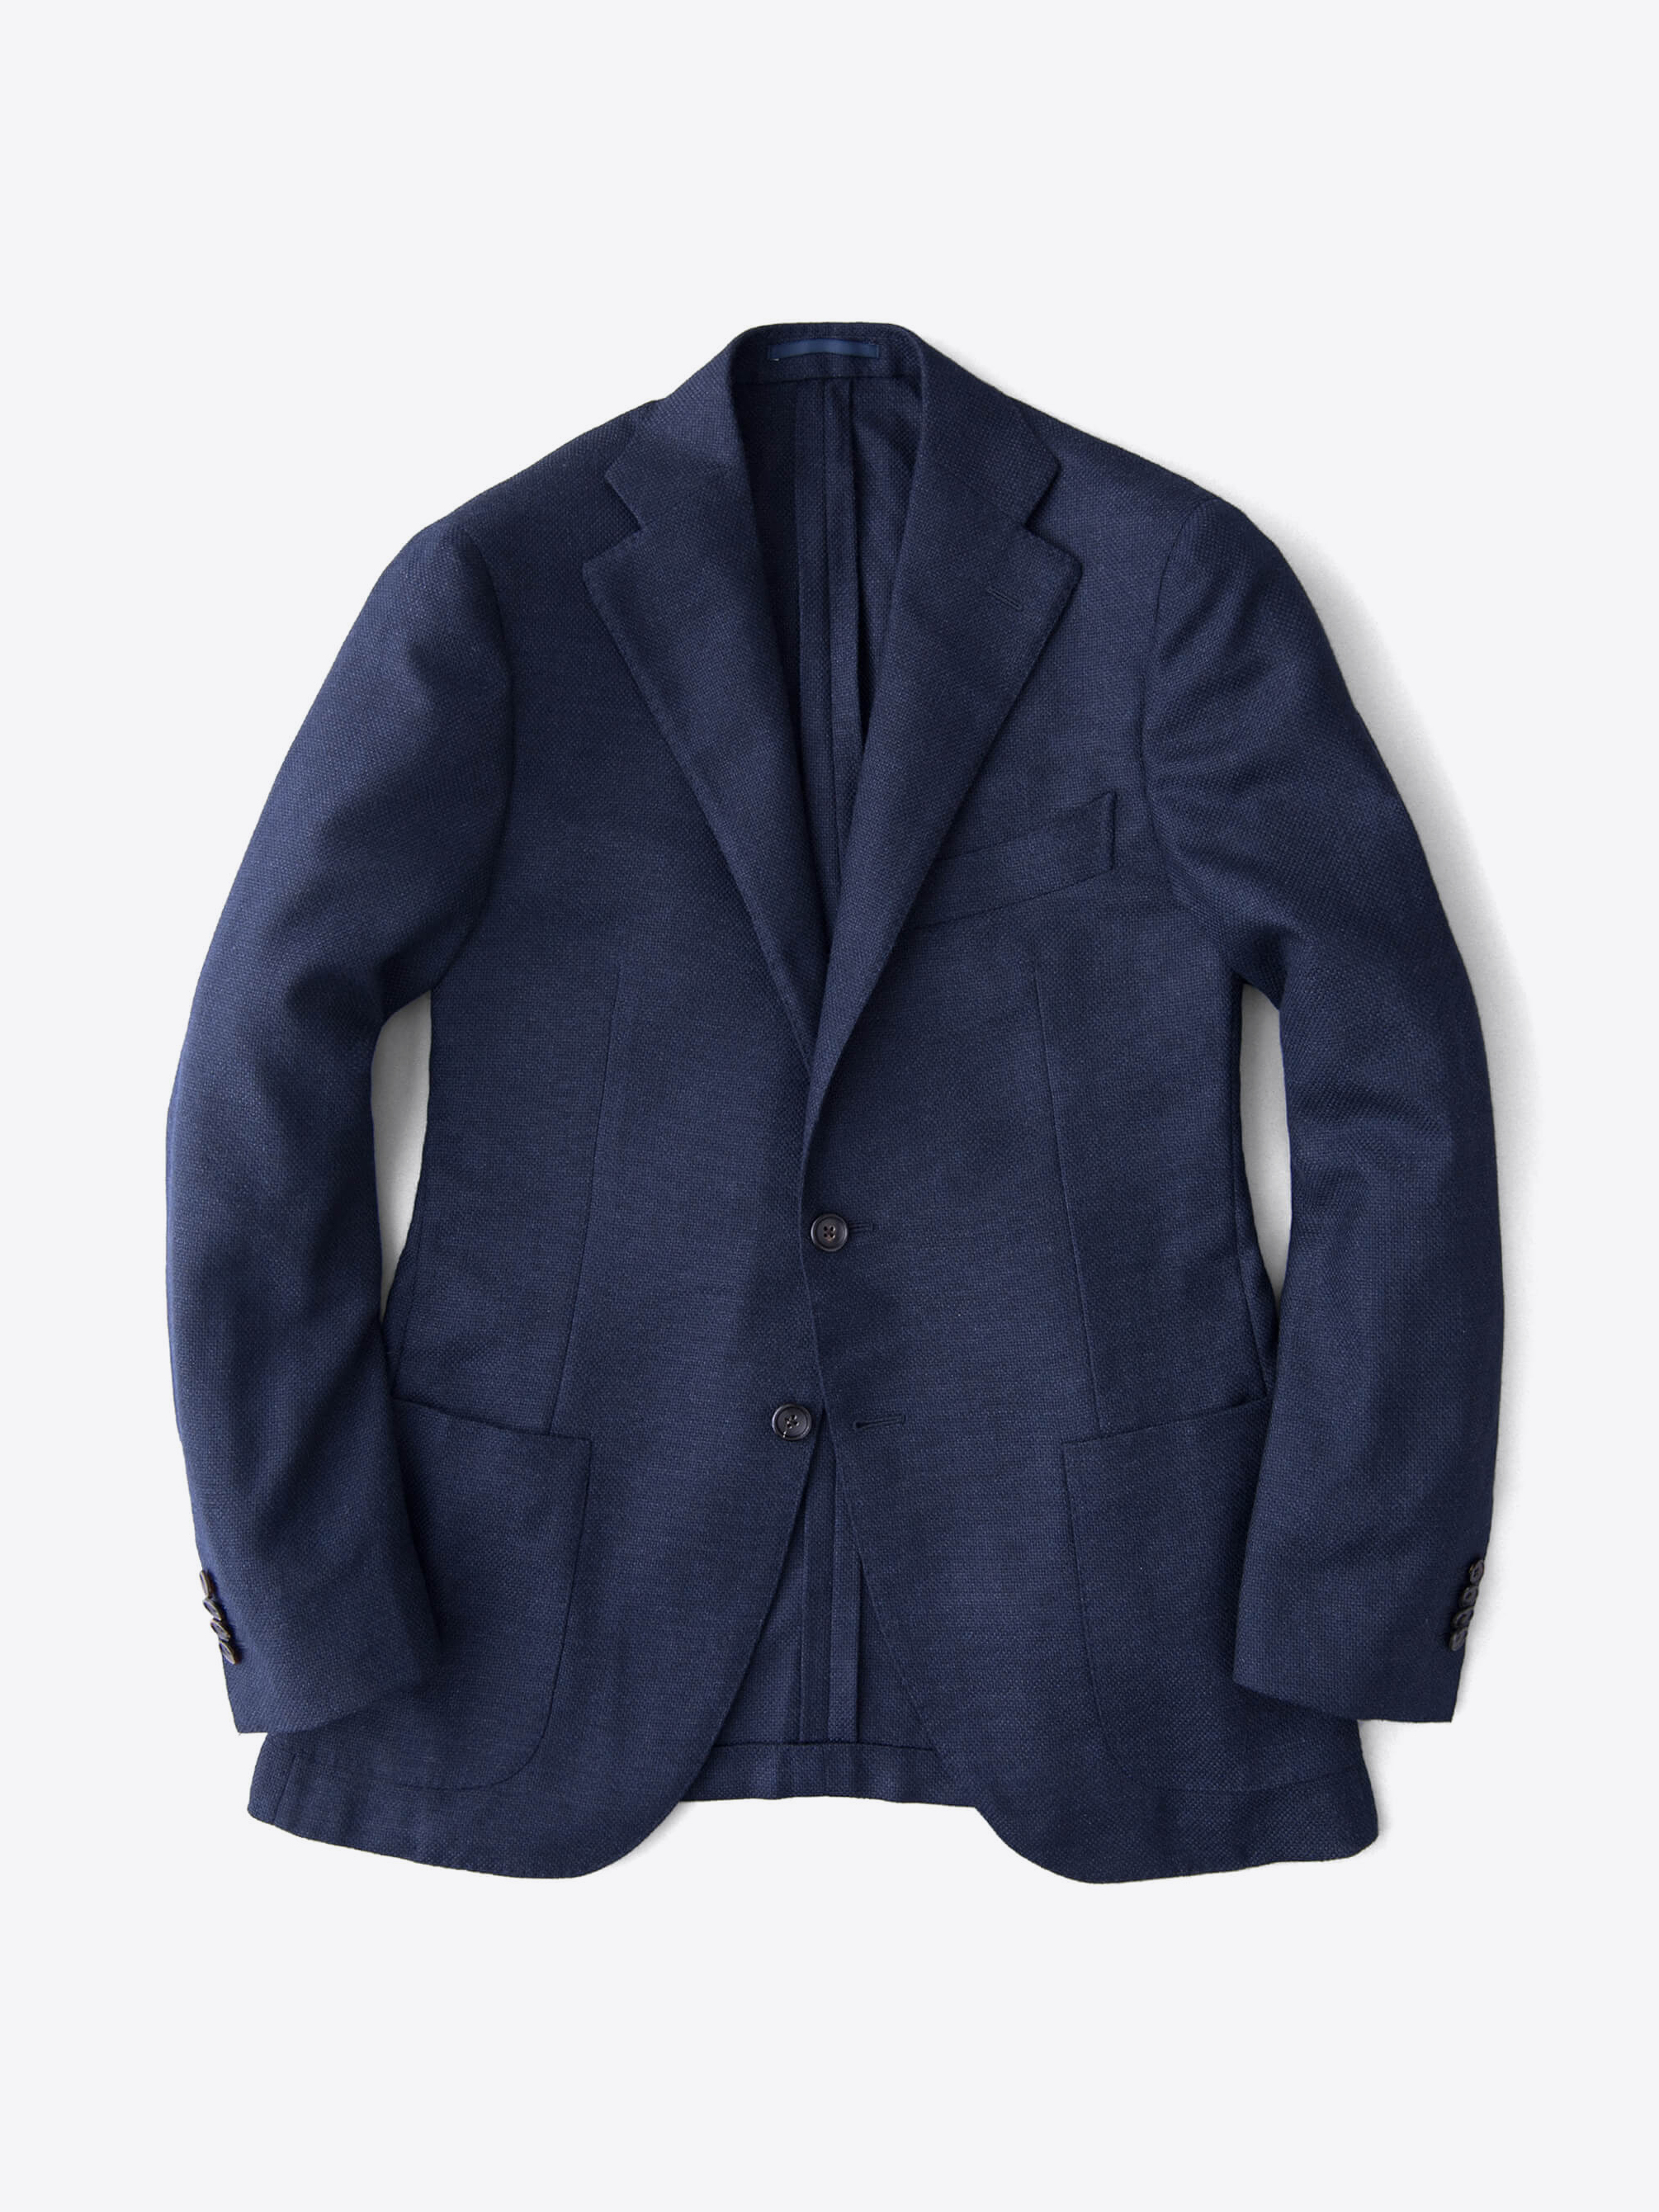 Hudson Navy Wool and Cashmere Flannel Hopsack Jacket by Proper Cloth